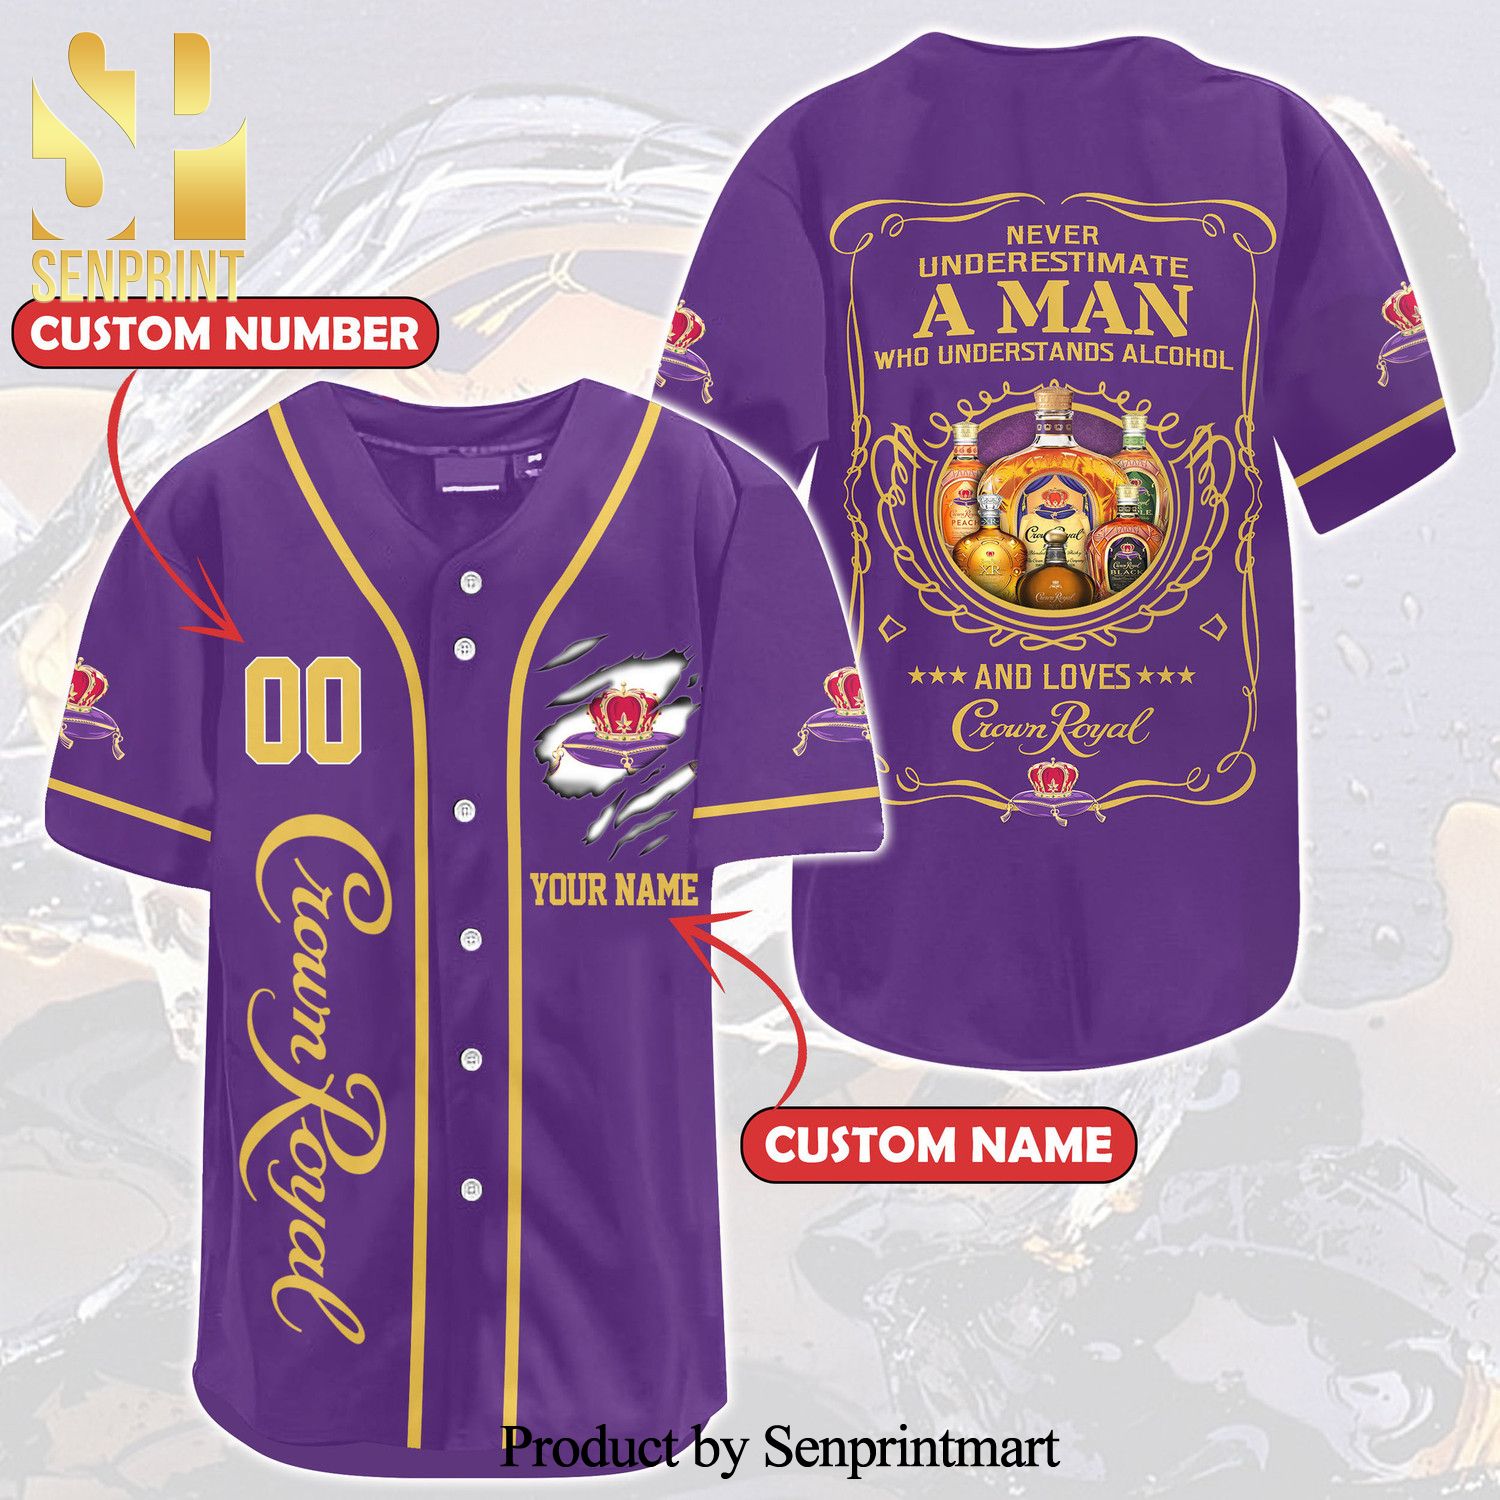 Personalized Crown Royal Never Underestimate A Man Full Printing Unisex Baseball Jersey - Purple